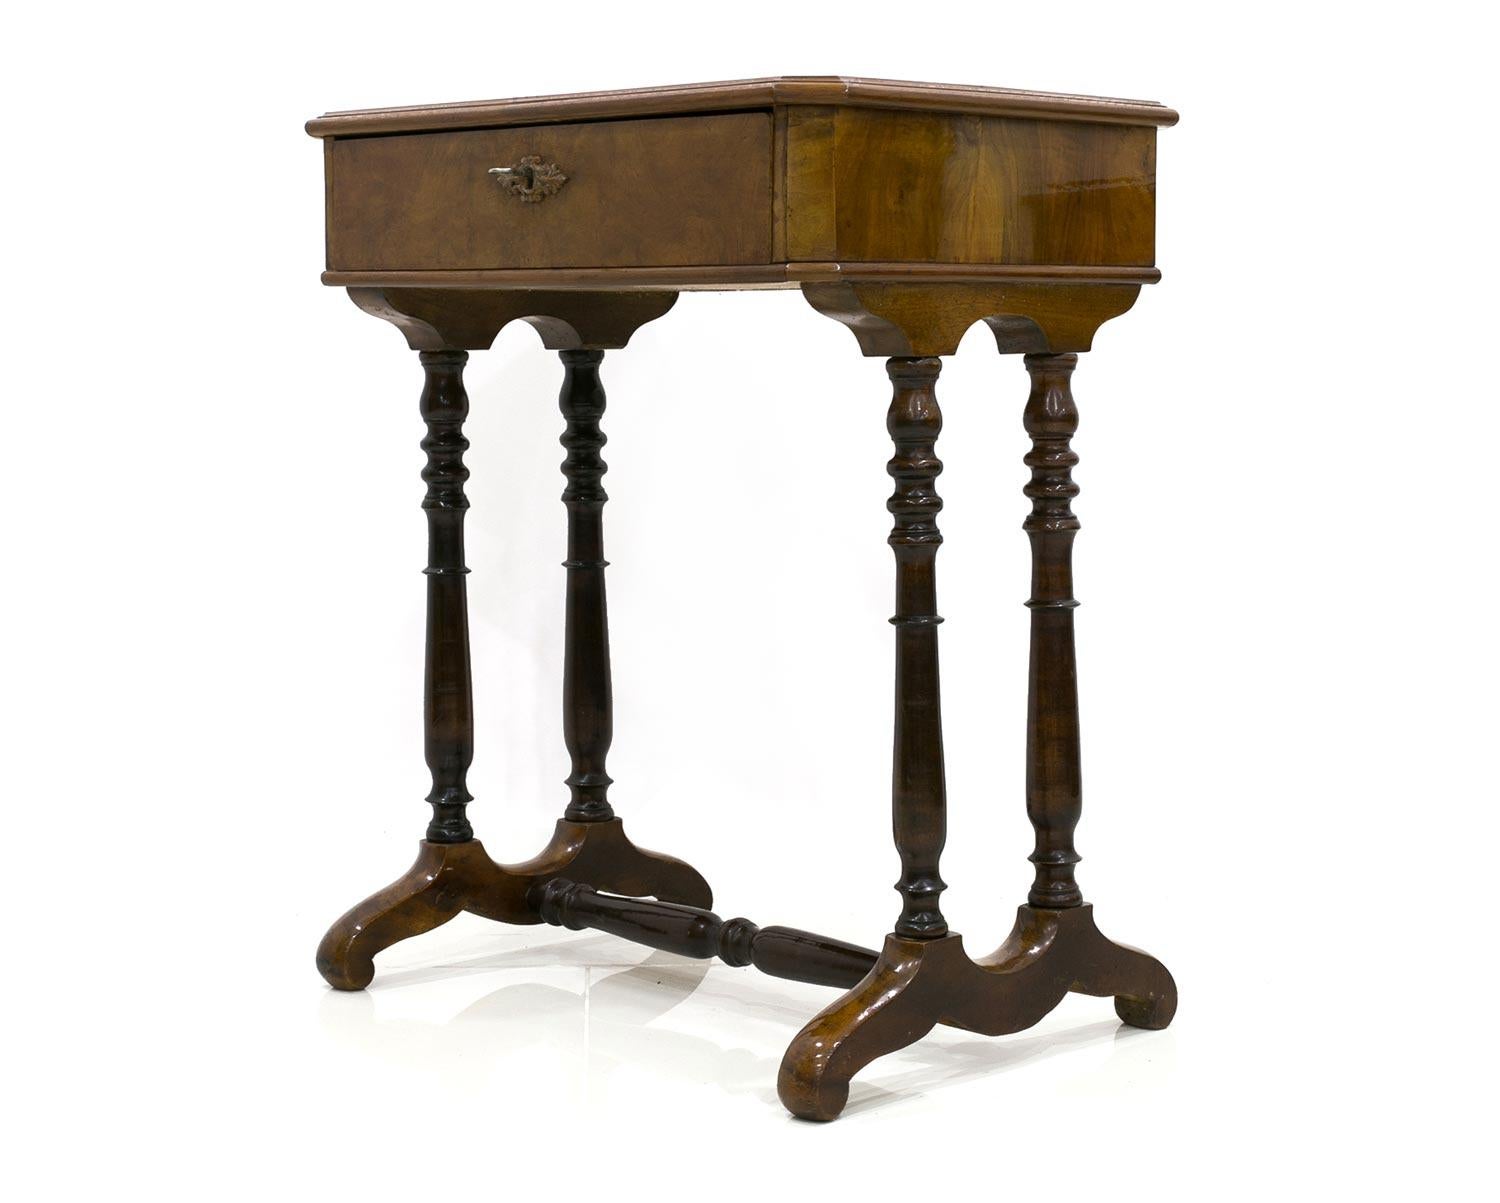 Decorative table, so-called thread table in the Biedermeier style. The furniture has been subjected to very delicate and professional restoration. The origin country is France. The piece was manufactured circa 1820-1830. This thread table is